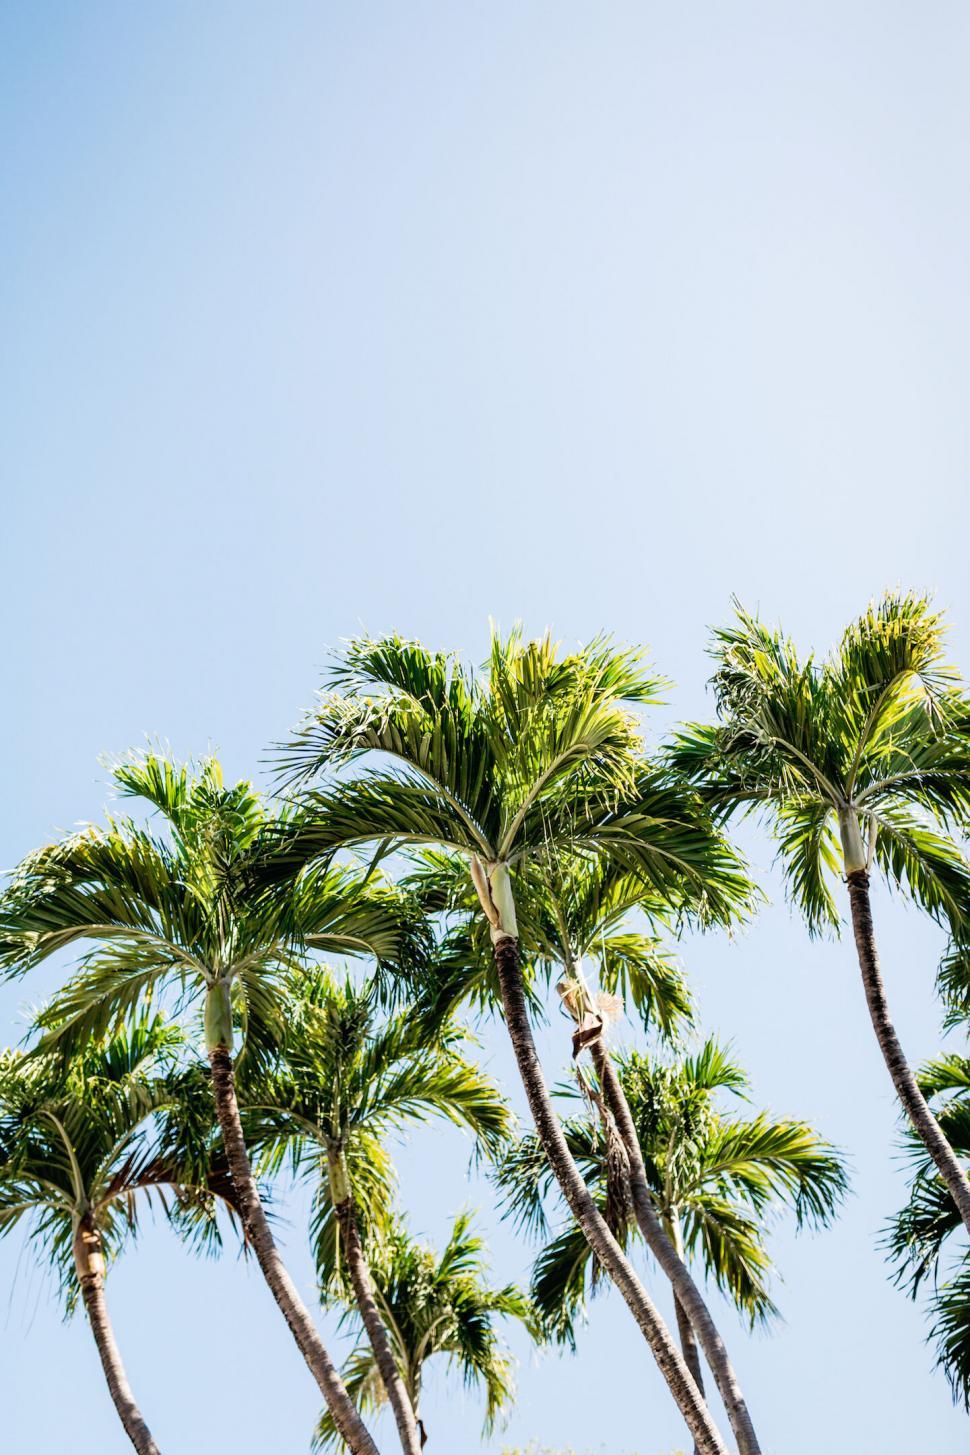 Free Image of Palm trees against clear blue sky background 